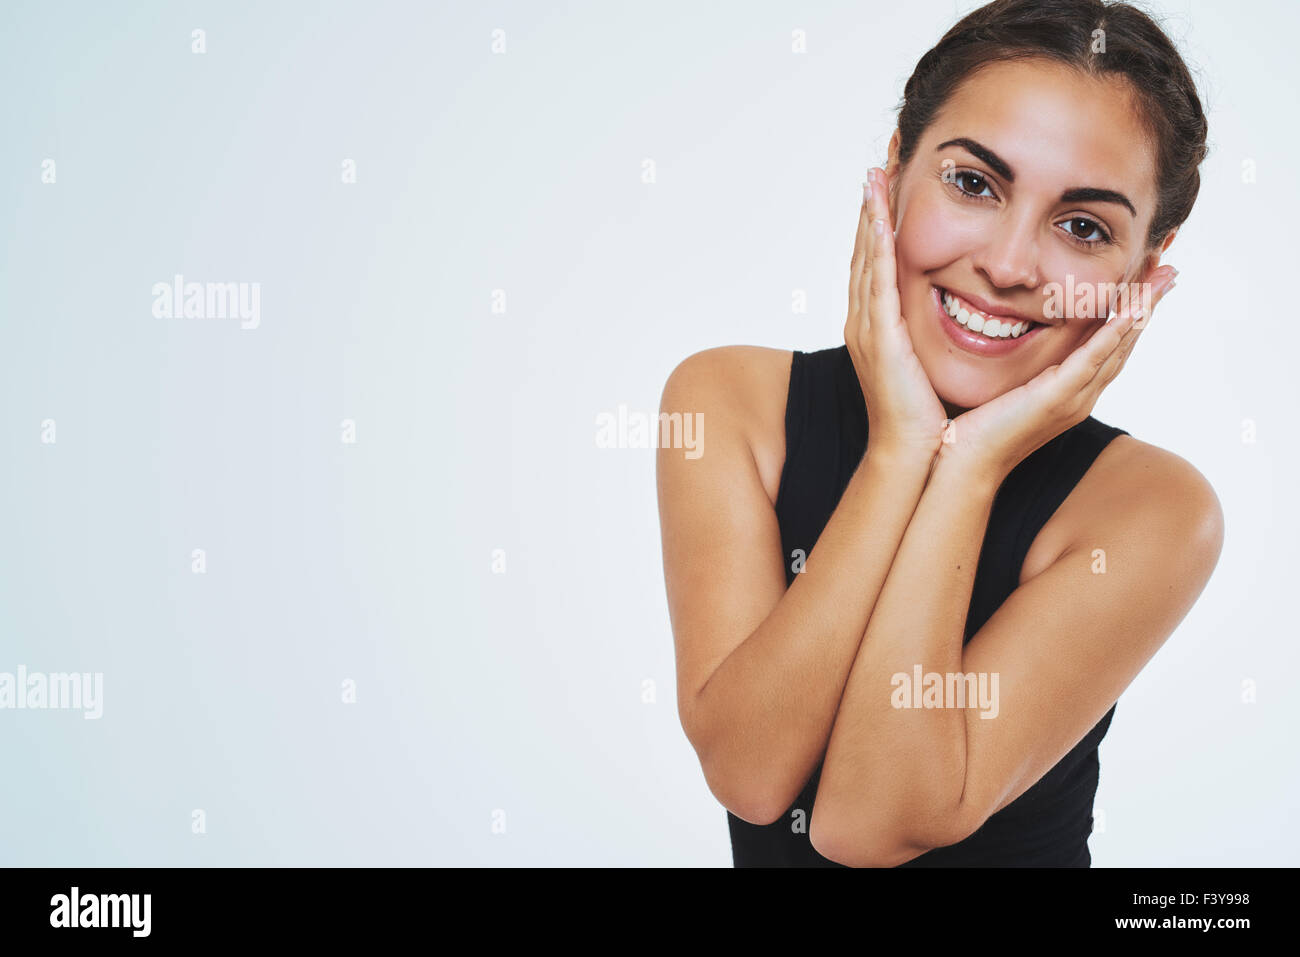 Beautiful woman with nice skin, smiling at camera holding her cheeks. Copy space. Isolated Portrait Stock Photo